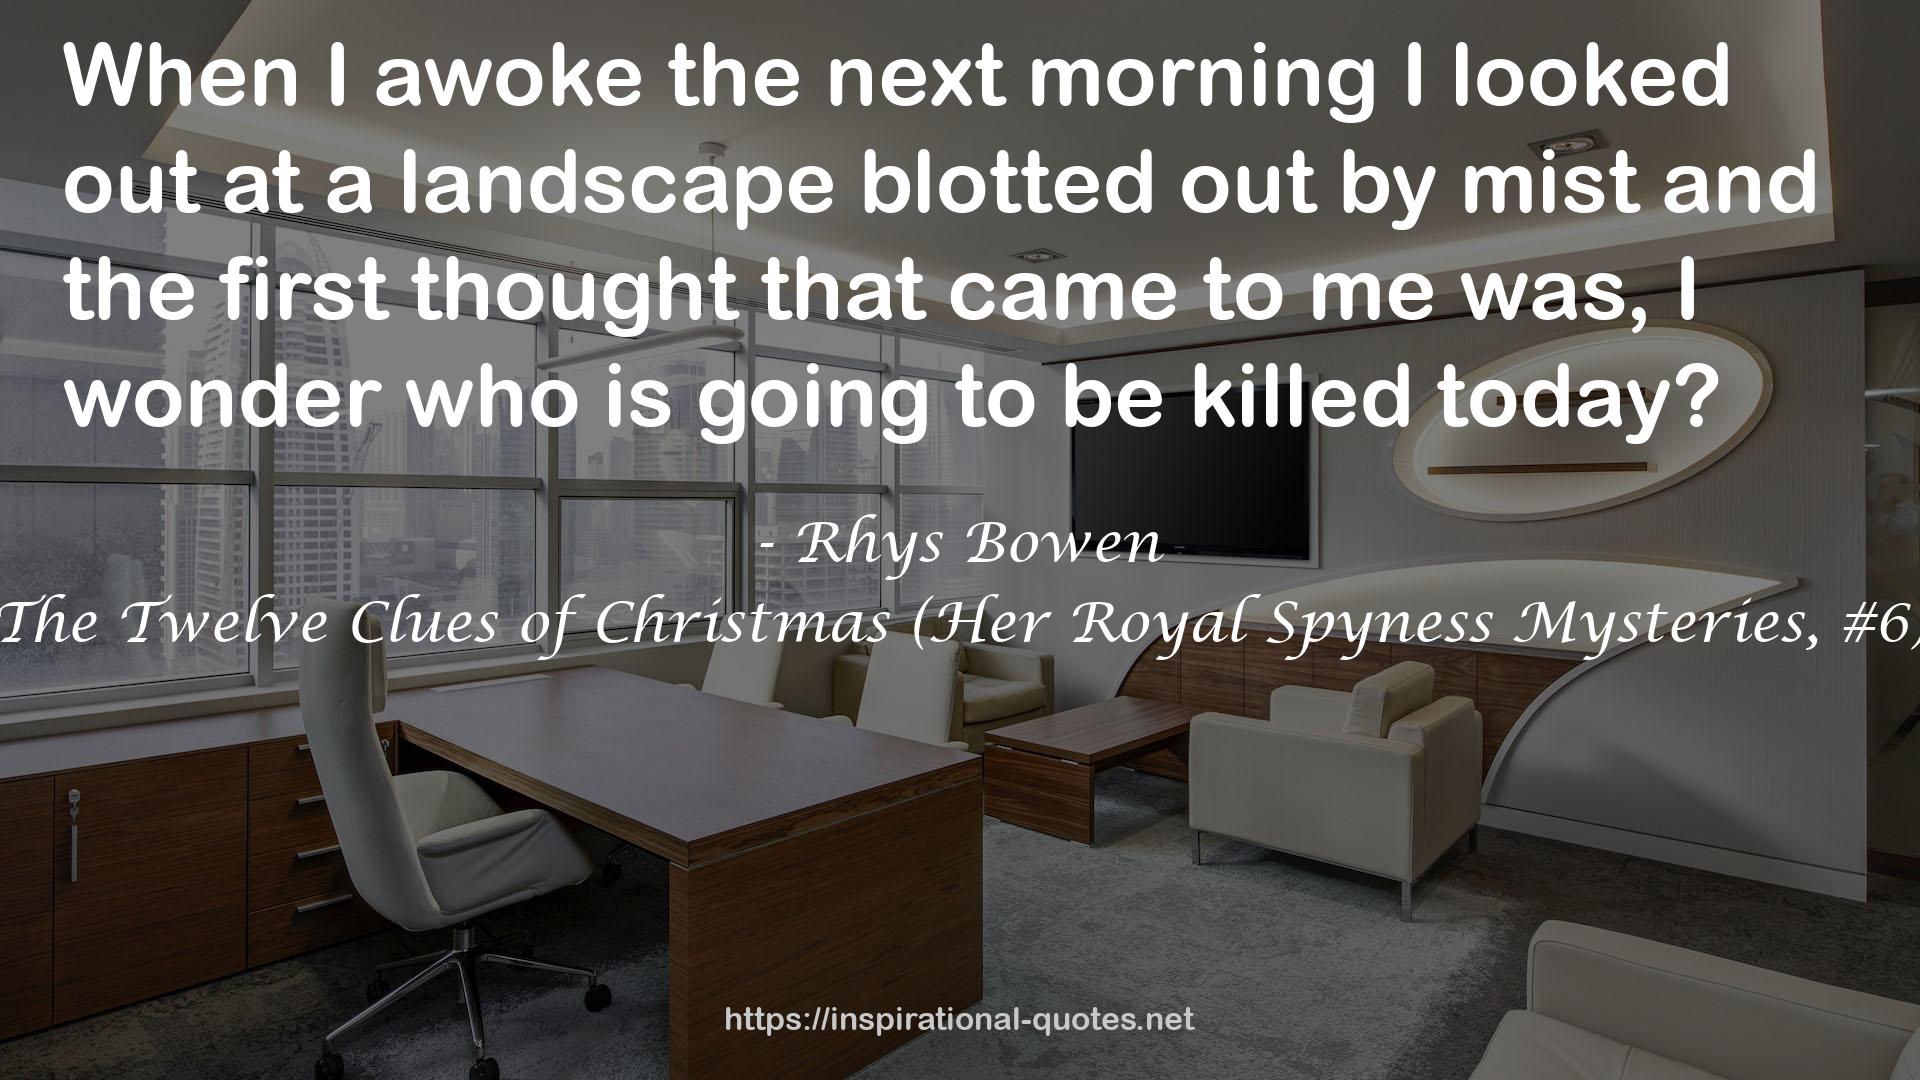 The Twelve Clues of Christmas (Her Royal Spyness Mysteries, #6) QUOTES